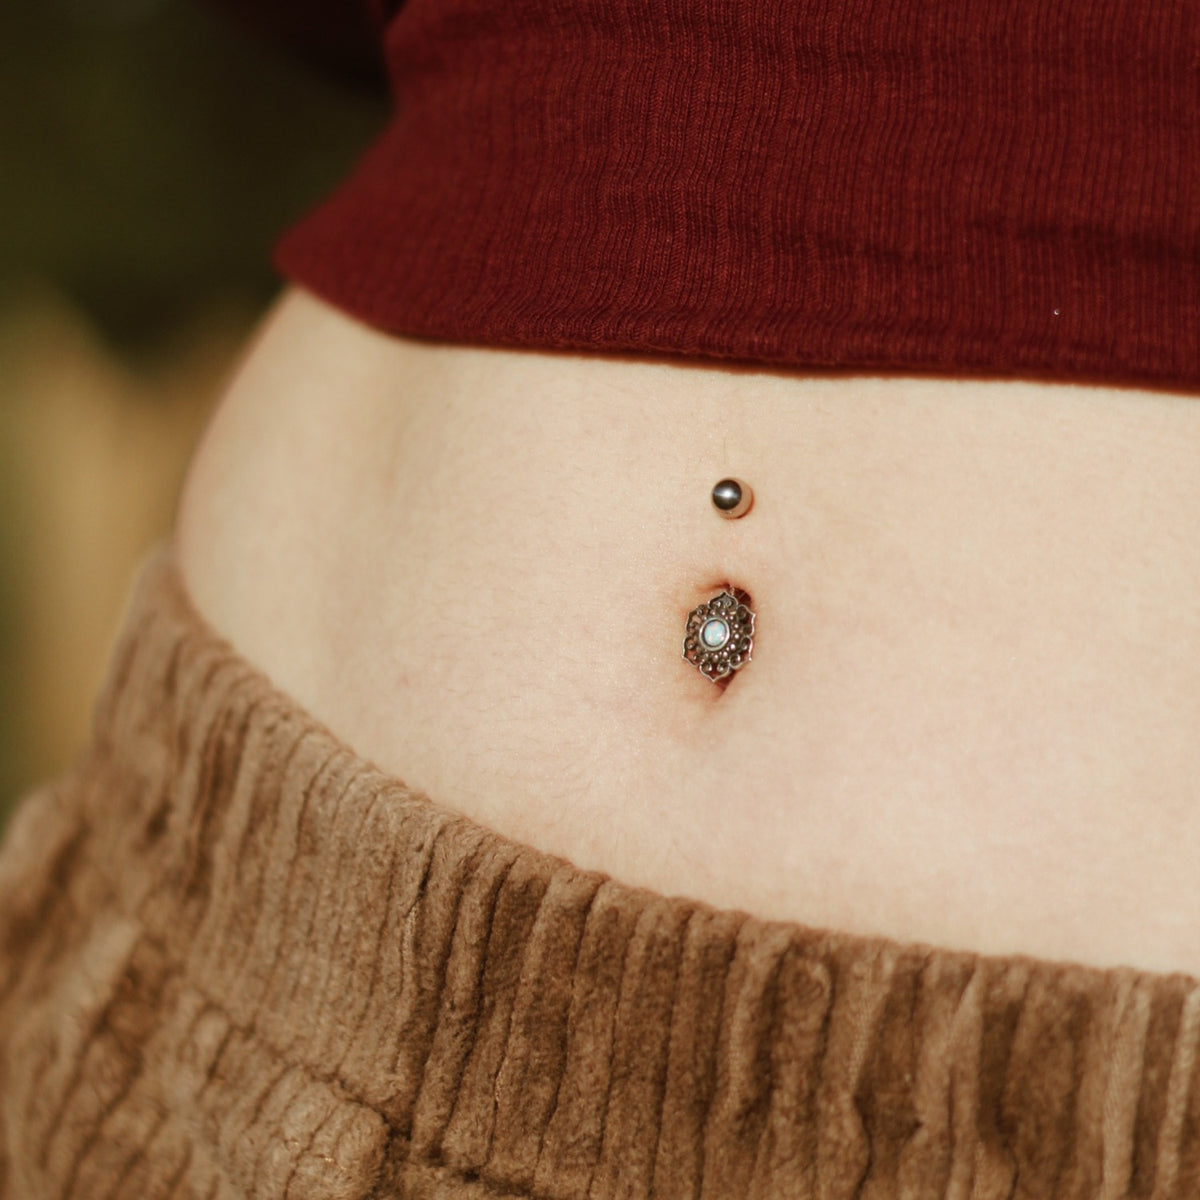 belly button rings